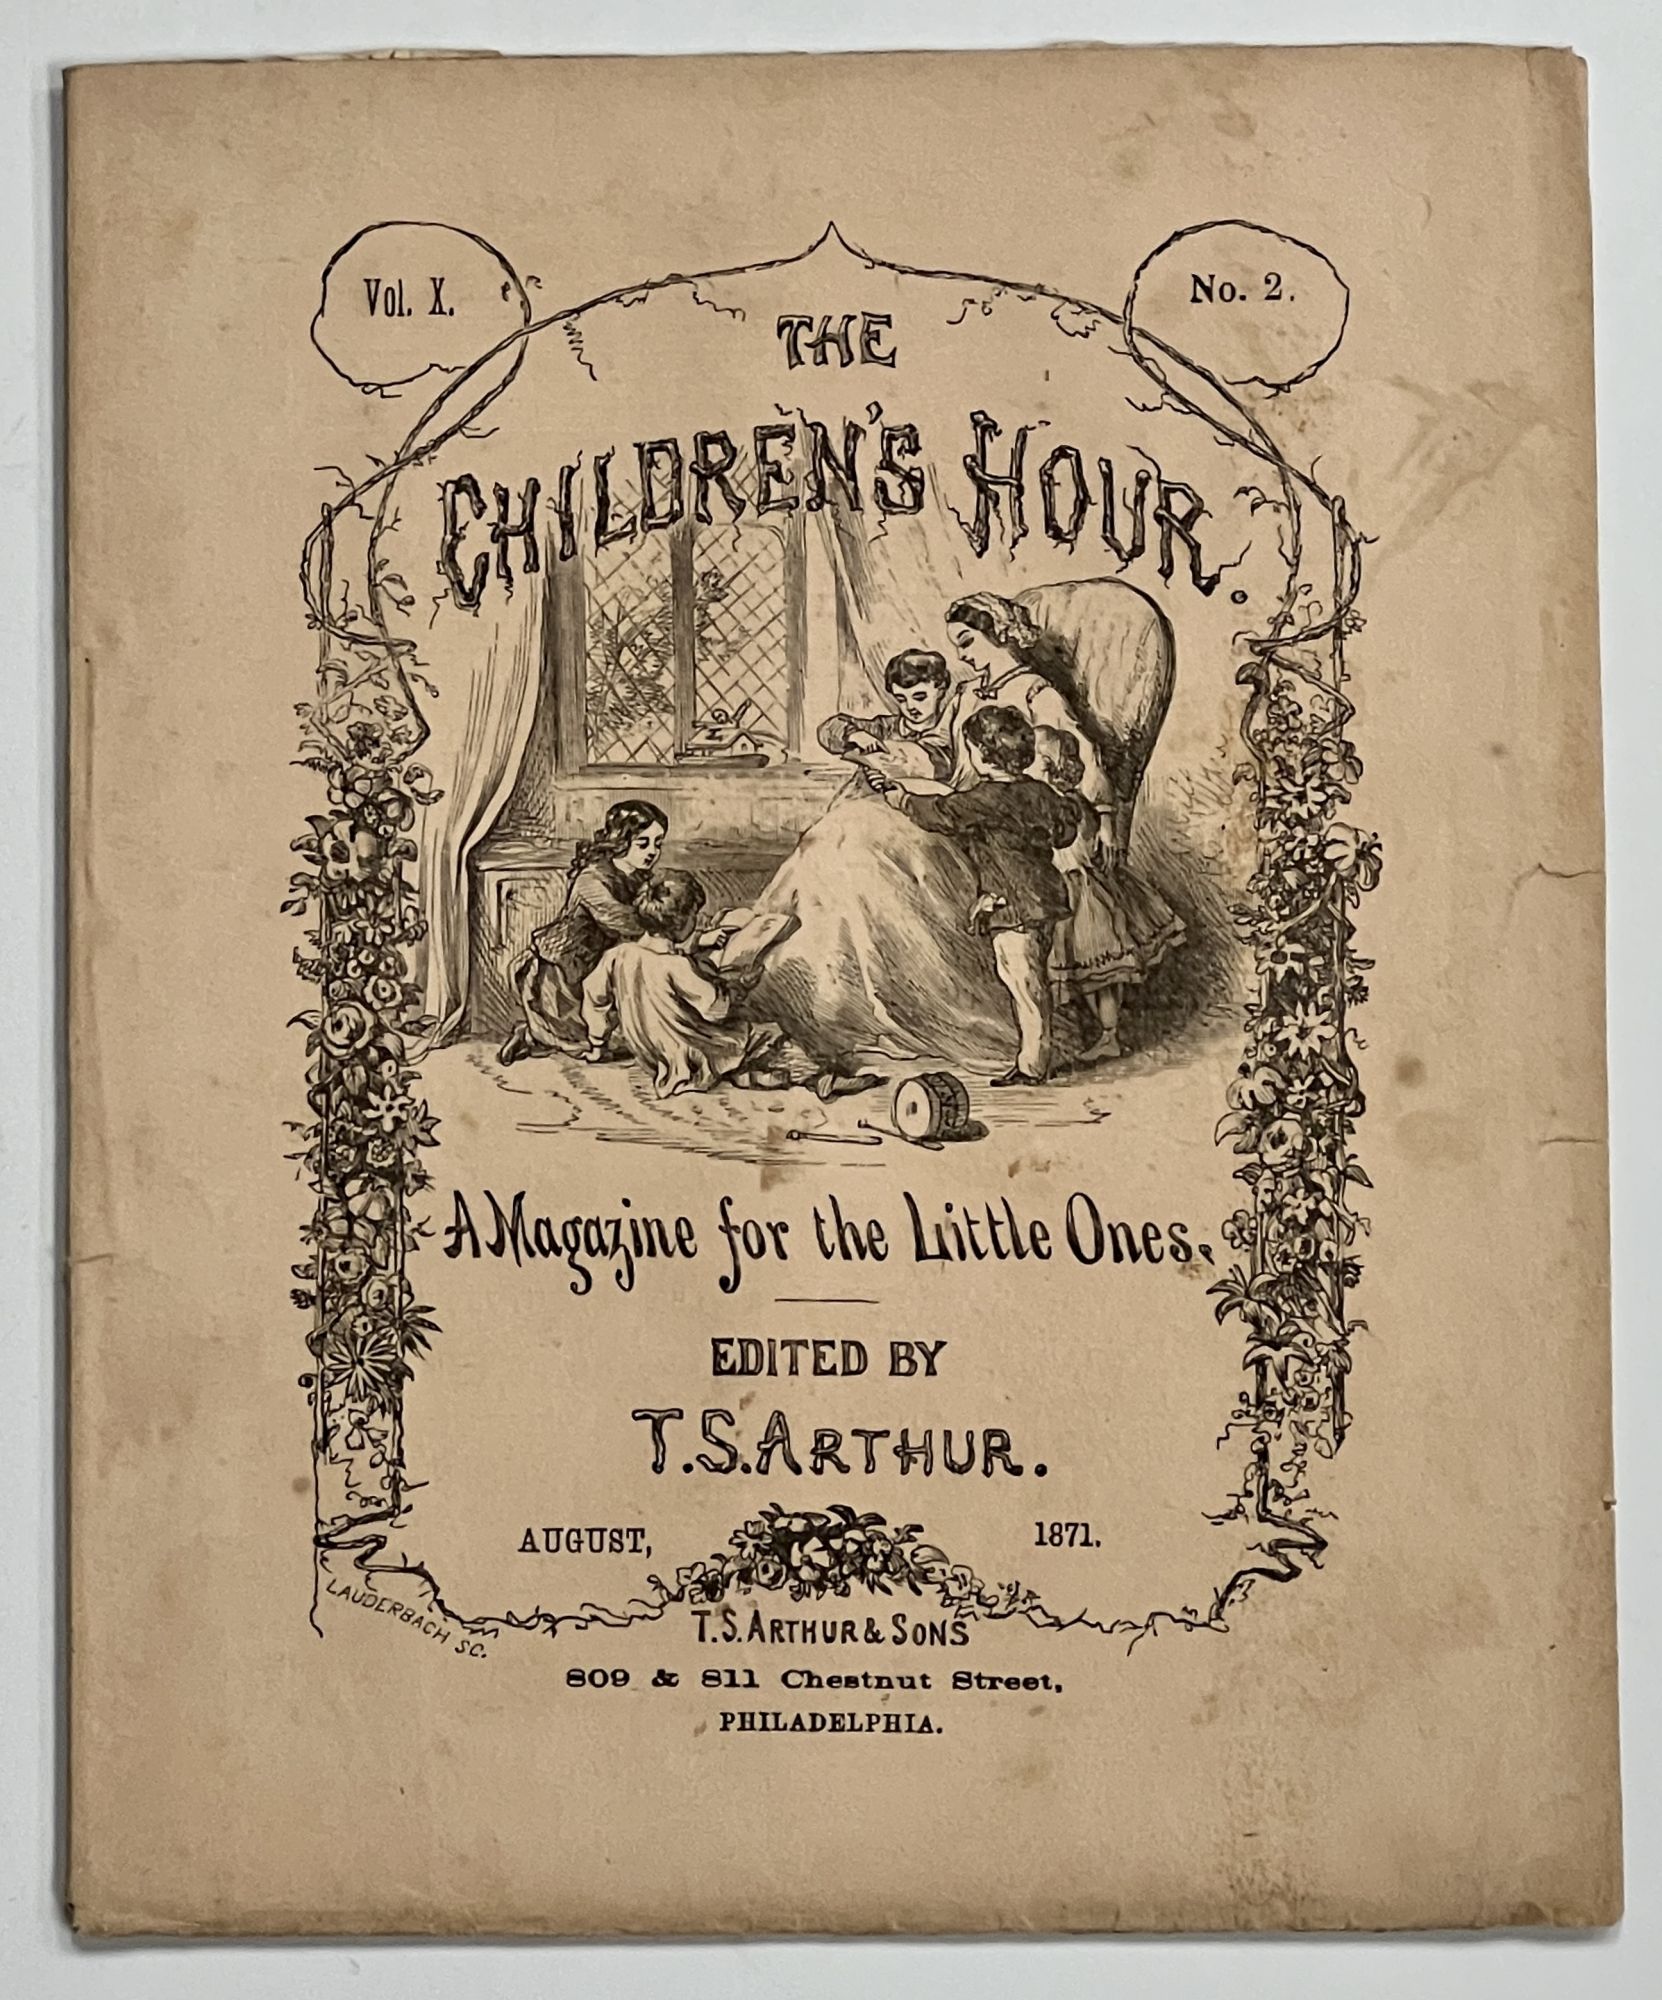 Arthur, T[imothy]. S[hay. 1809 - 1885]. - Editor - The CHILDREN'S HOUR. A Magazine for the Little Ones. August, 1871. Vol. X. No. 2